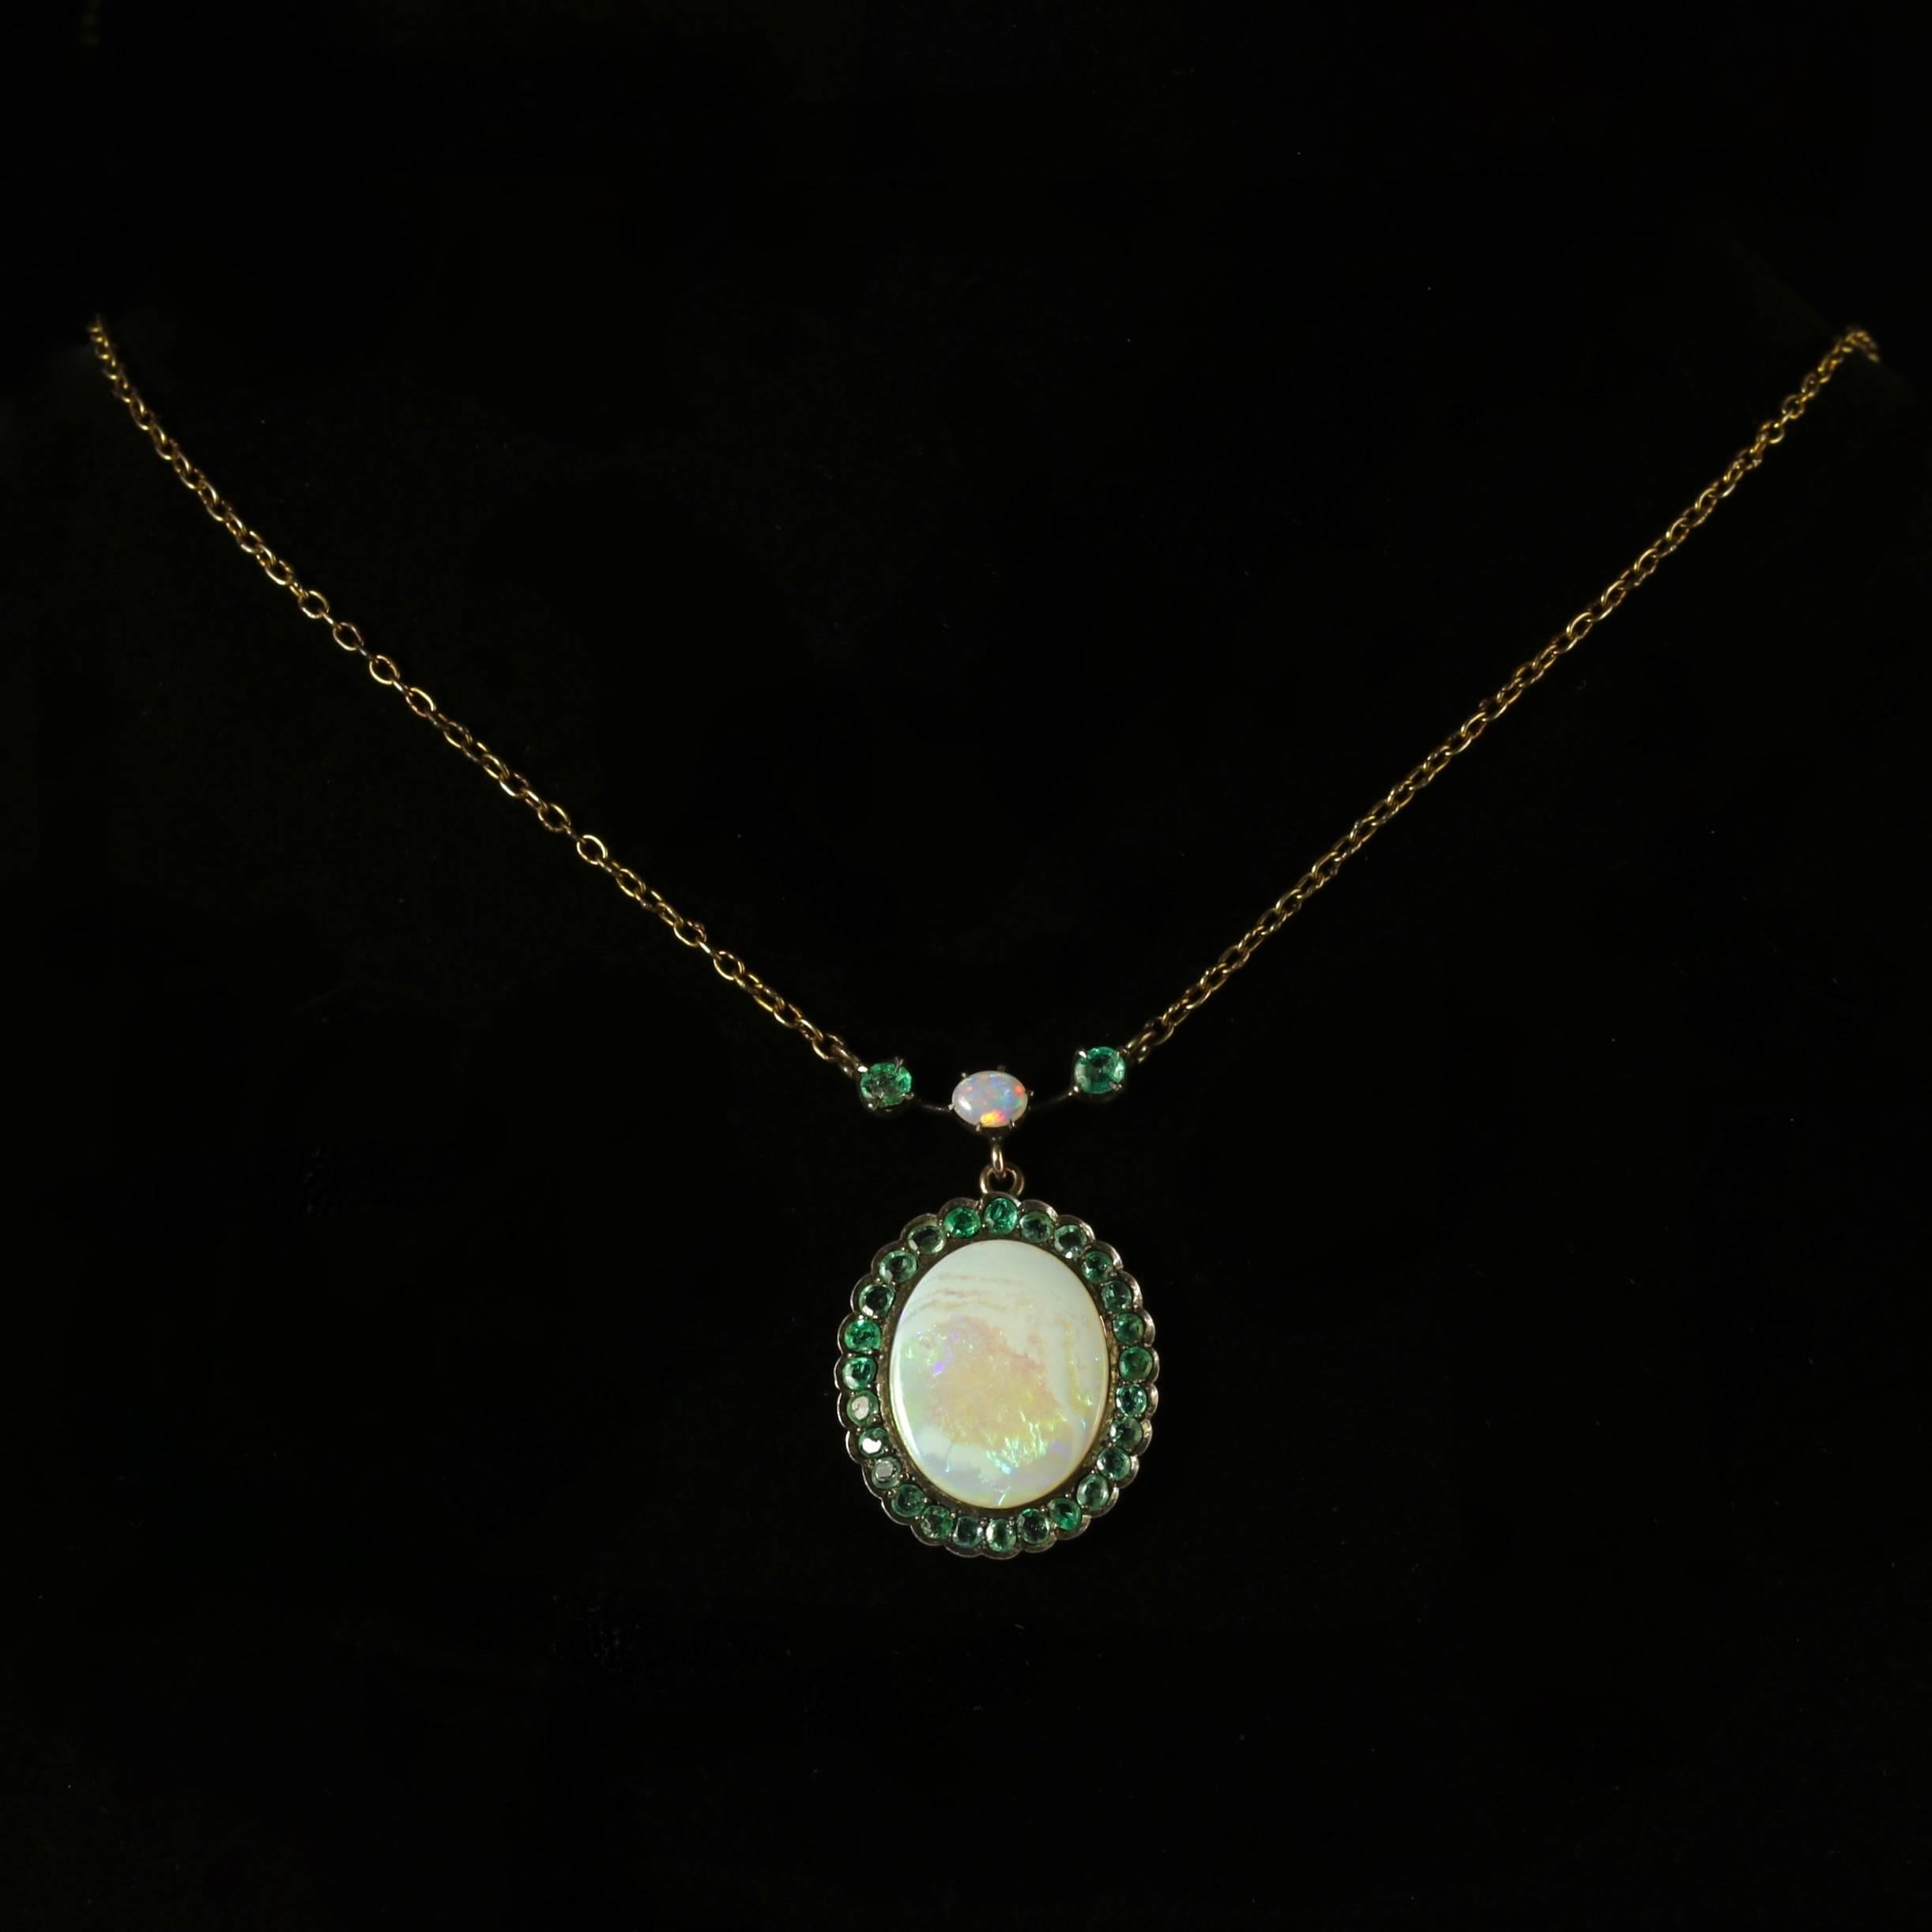 This beautiful 9ct Gold Opal and Emerald necklace is Circa 1900.

The wonderful necklace is adorned with an Opal which is just under 0.25ct with two other small Emeralds either side which are both 0.10ct each.

This leads to a large Opal dropper